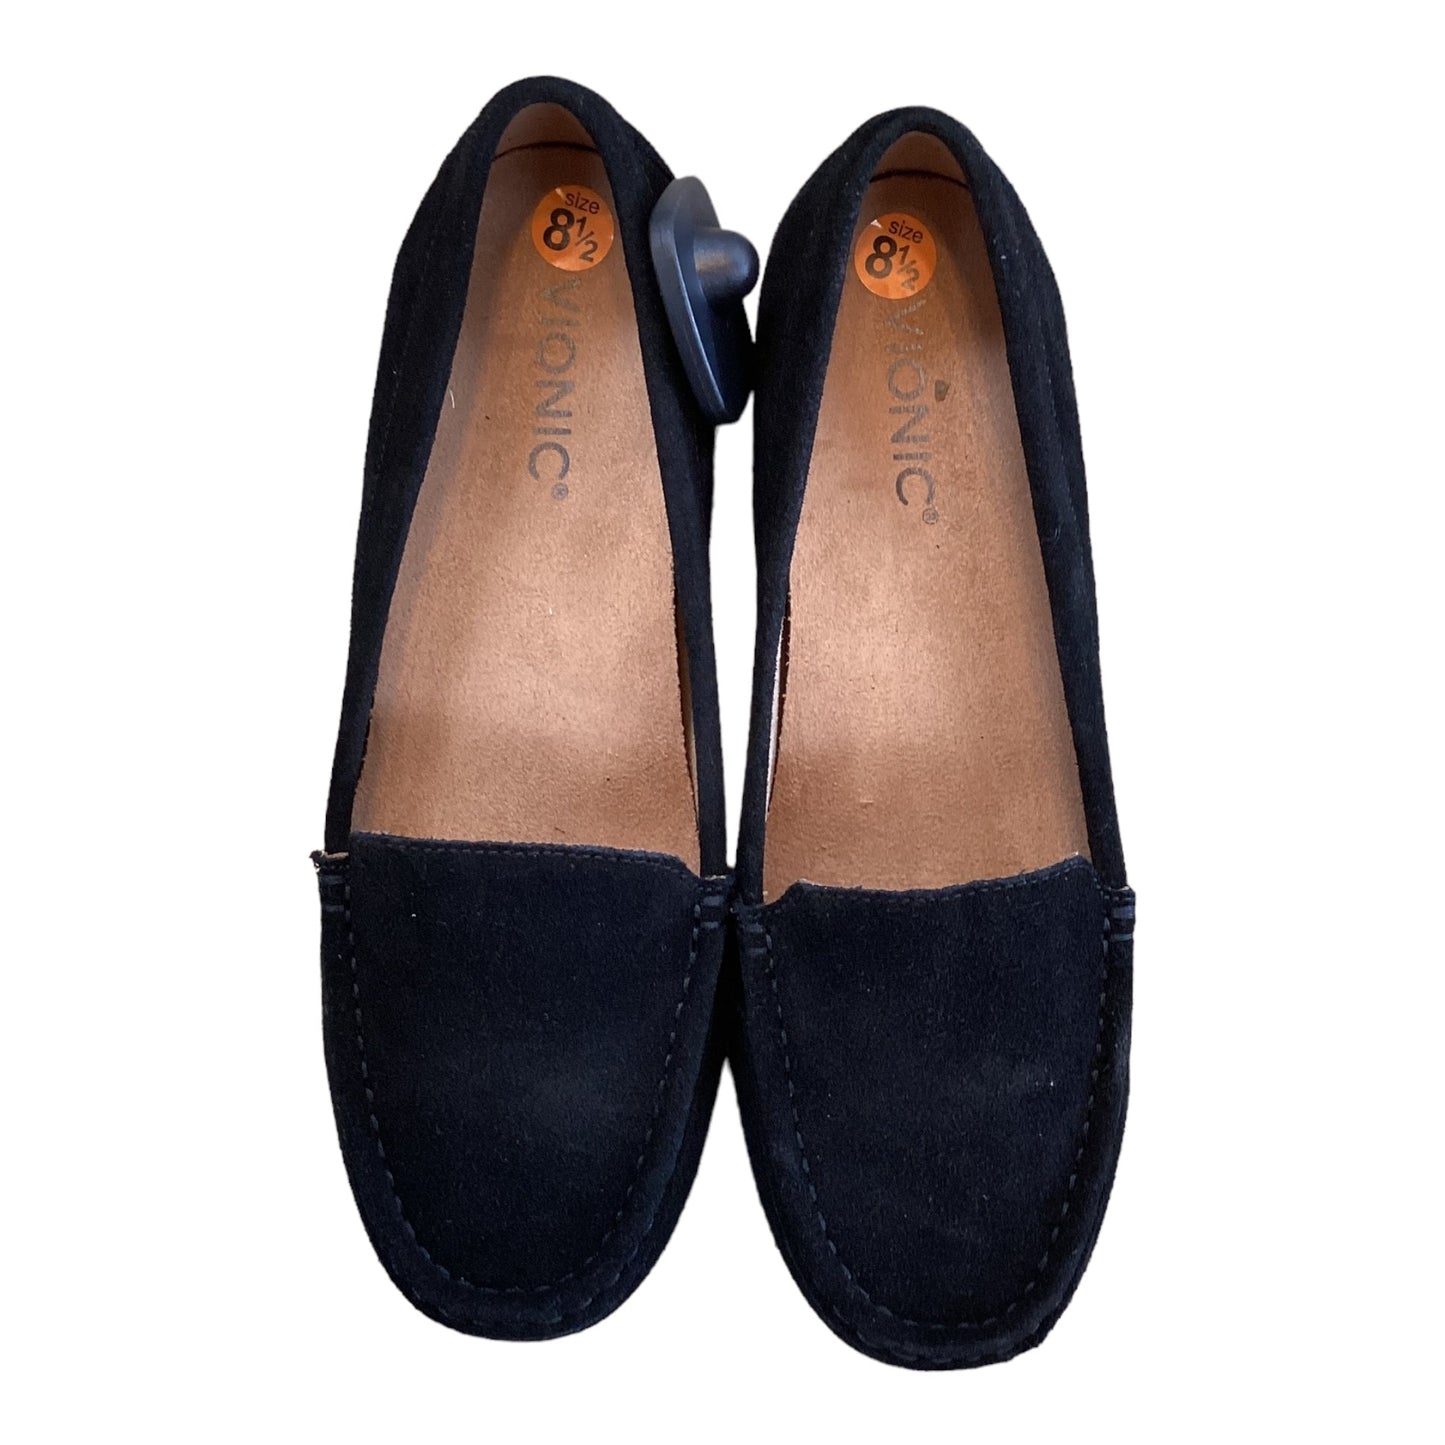 Shoes Flats By Vionic  Size: 8.5